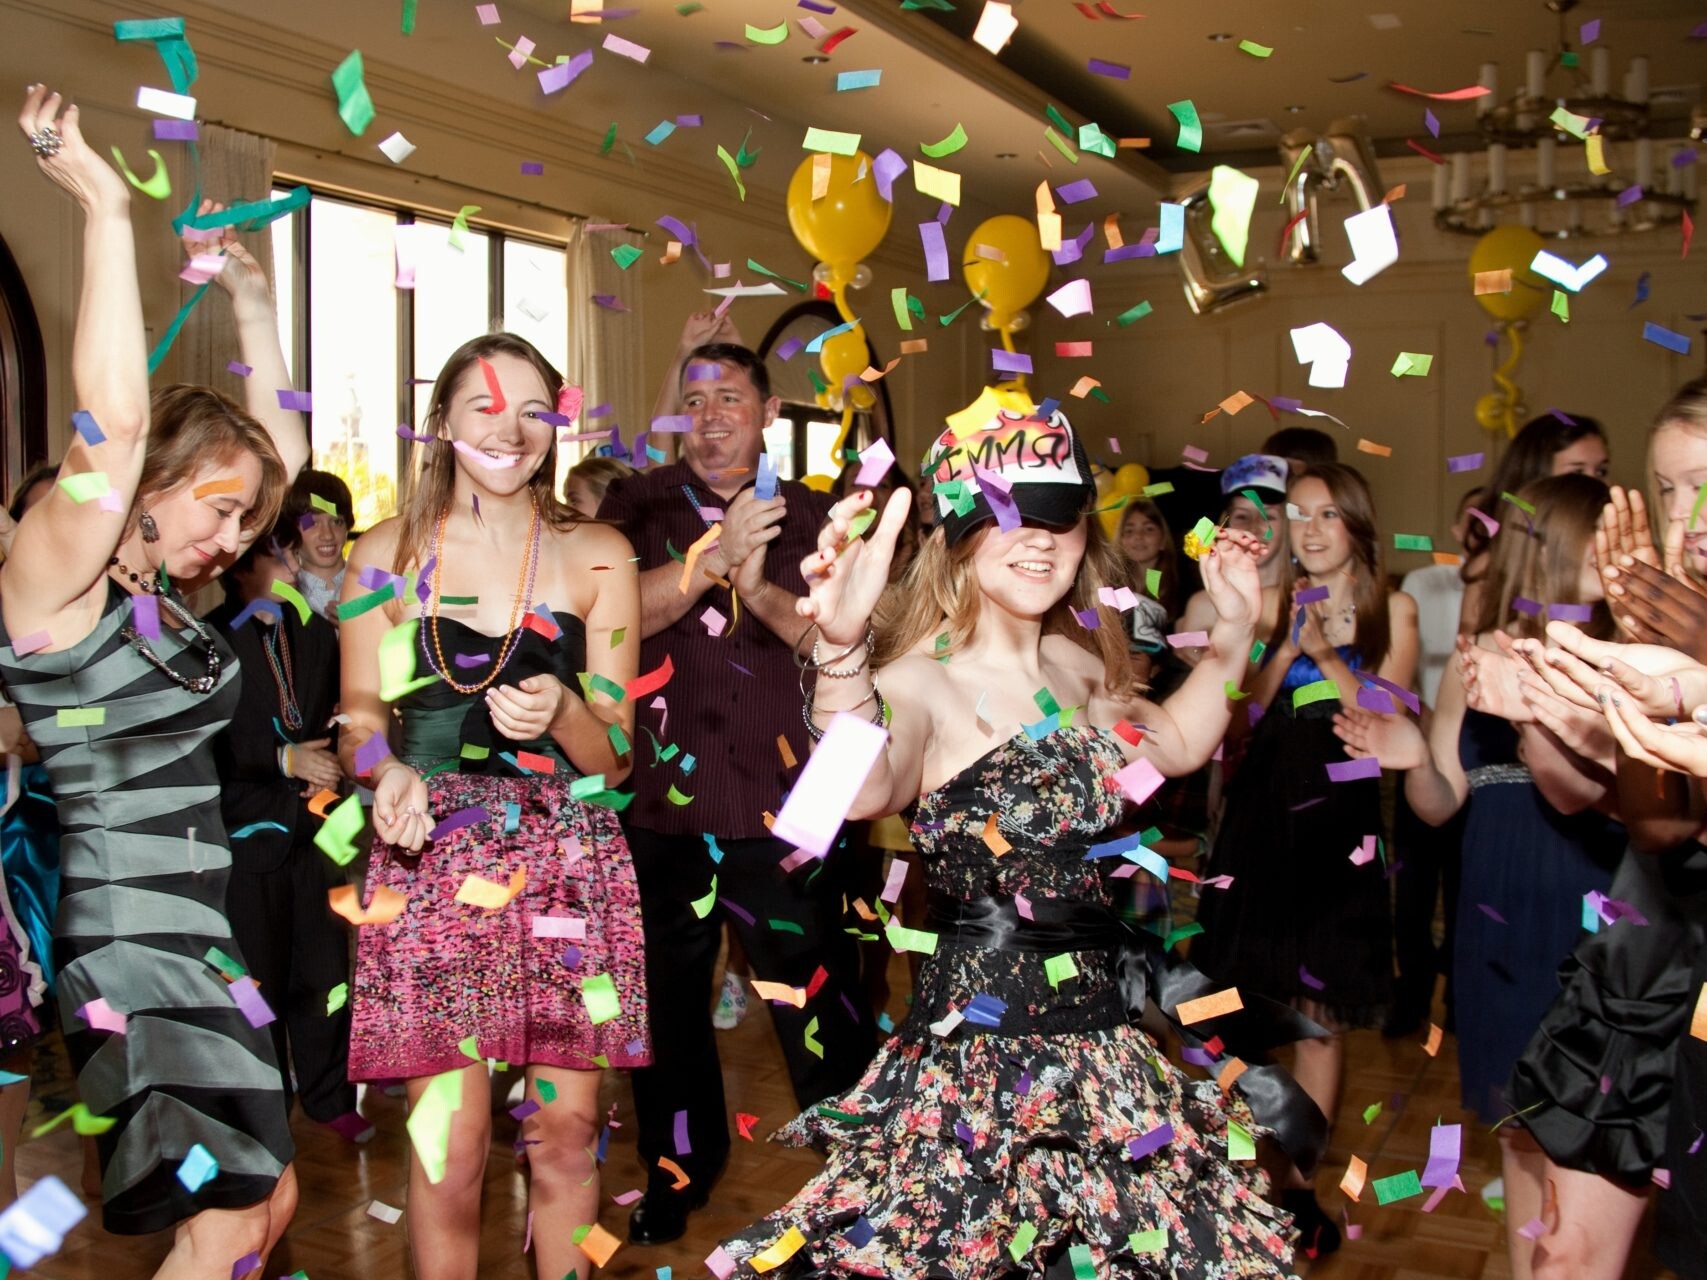 Girls smiling, clapping, dancing, and having fun at a party with confetti falling for a bar mitzvah event.